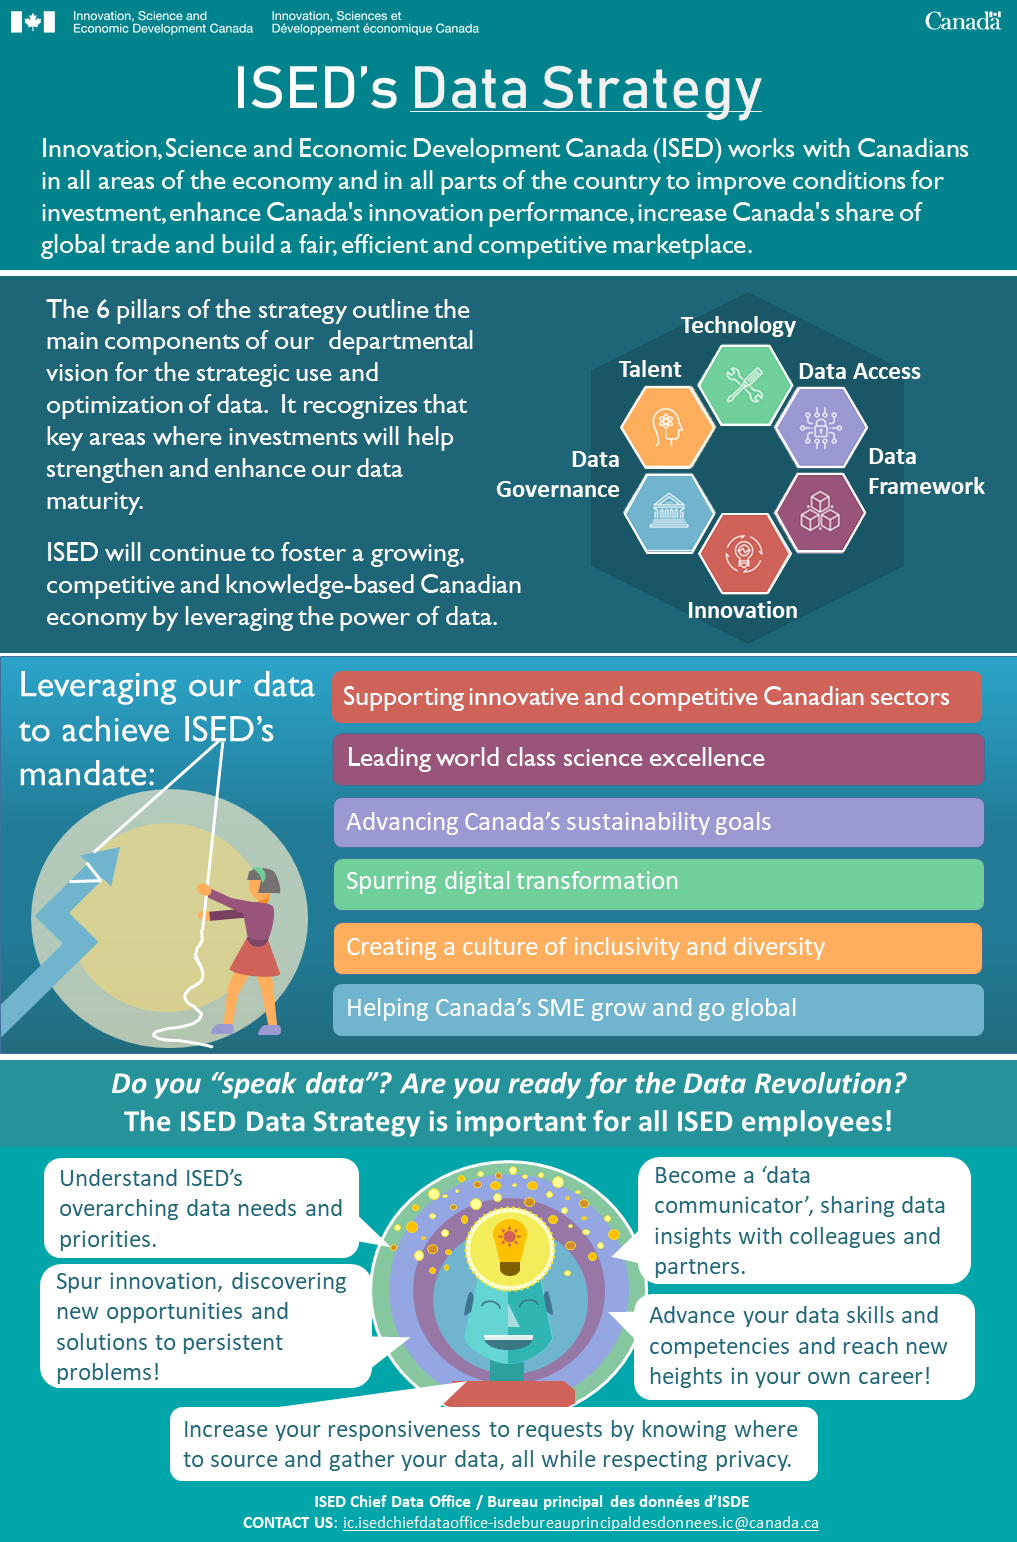 ISED Data Strategy Infographic